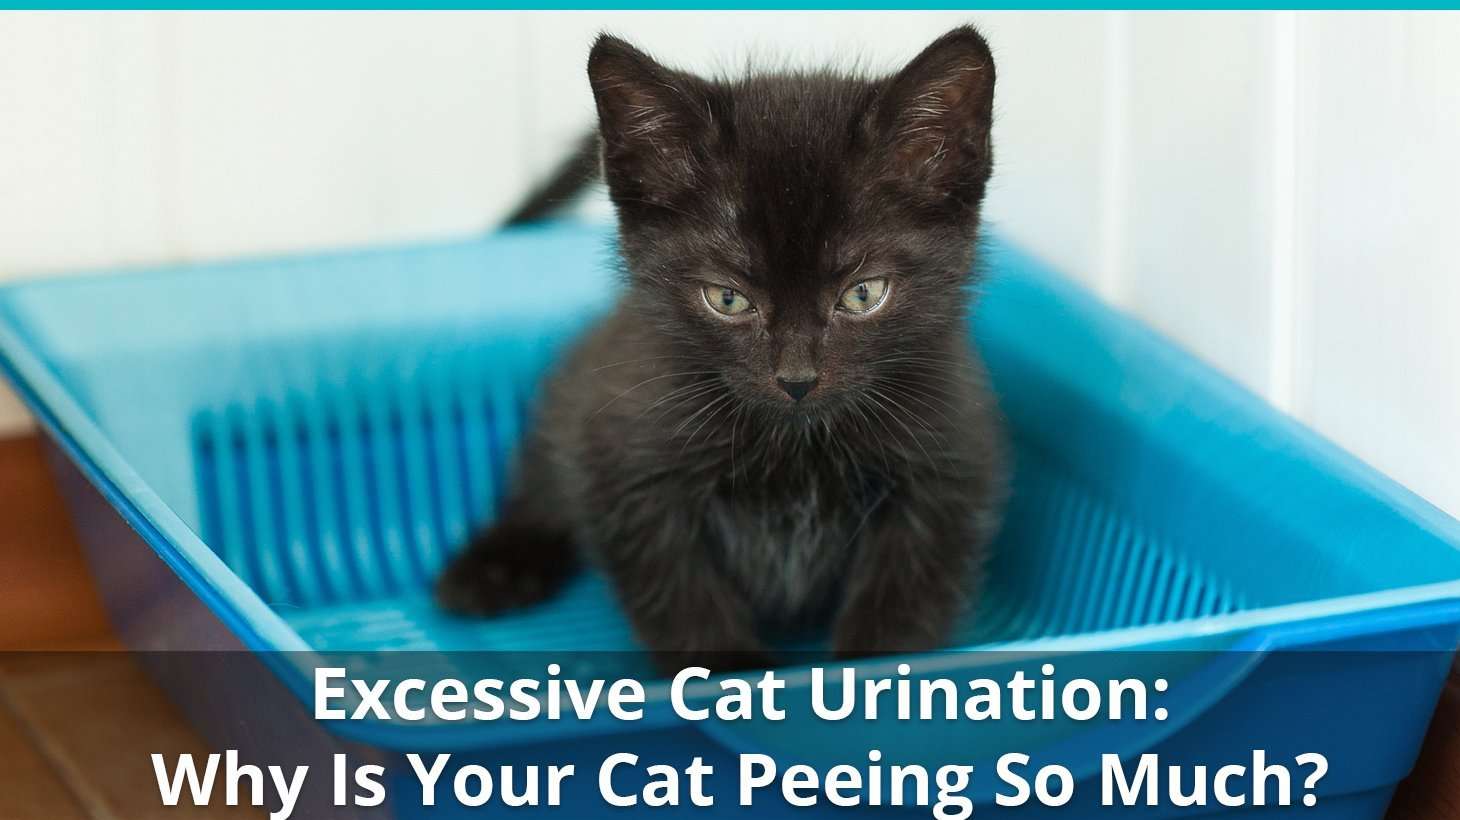 Why Is My Cat Peeing Excessively? How Often Do They Pee? Help!